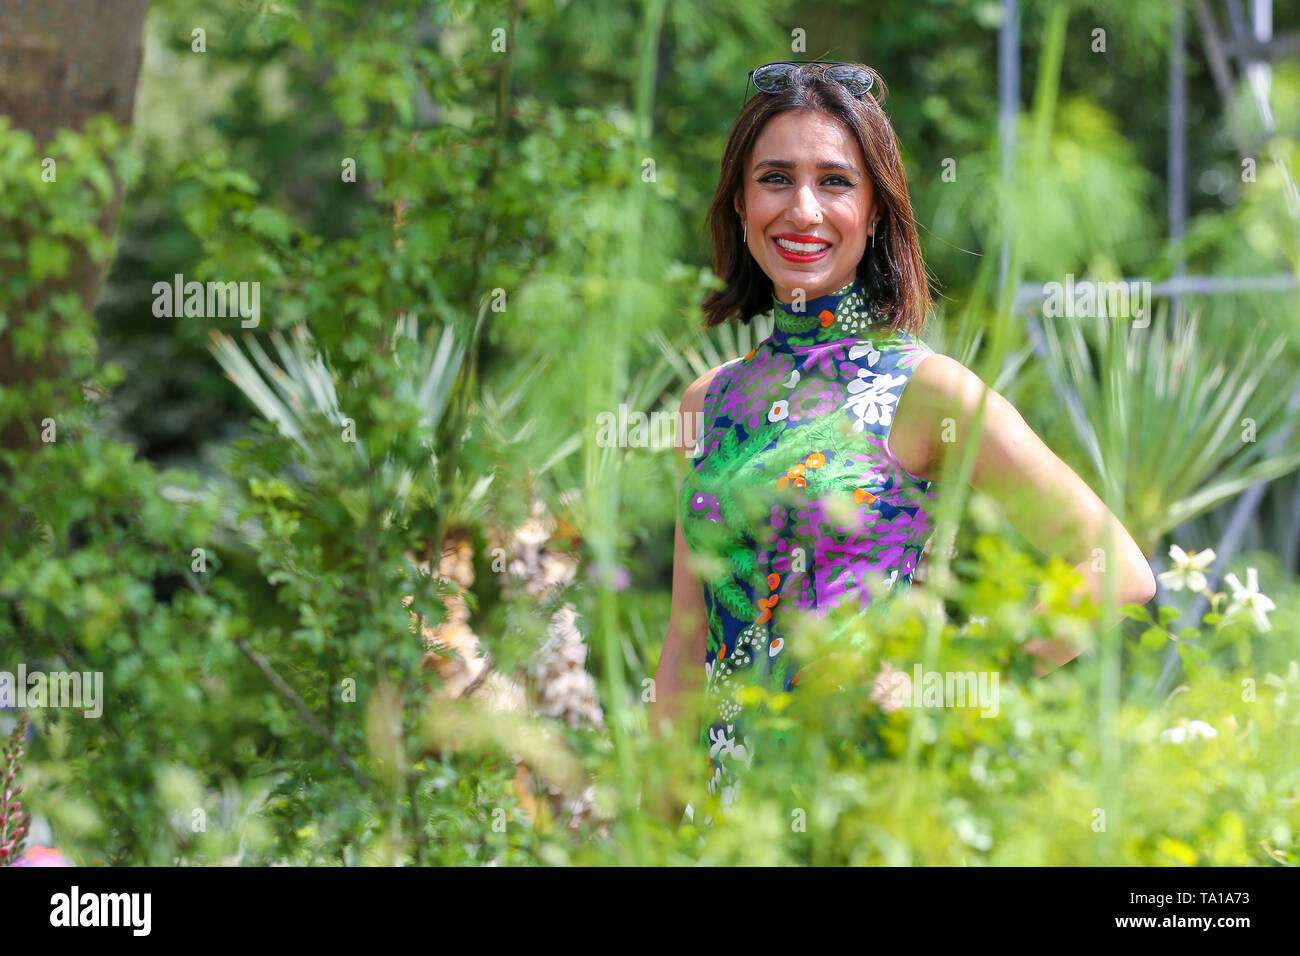 Anita Rani seen during the Chelsea Flower Show. The Royal Horticultural Society Chelsea Flower Show is an annual garden show over five days in the grounds of the Royal Hospital Chelsea in West London. The show is open to the public from 21 May until 25 May 2019. Stock Photo